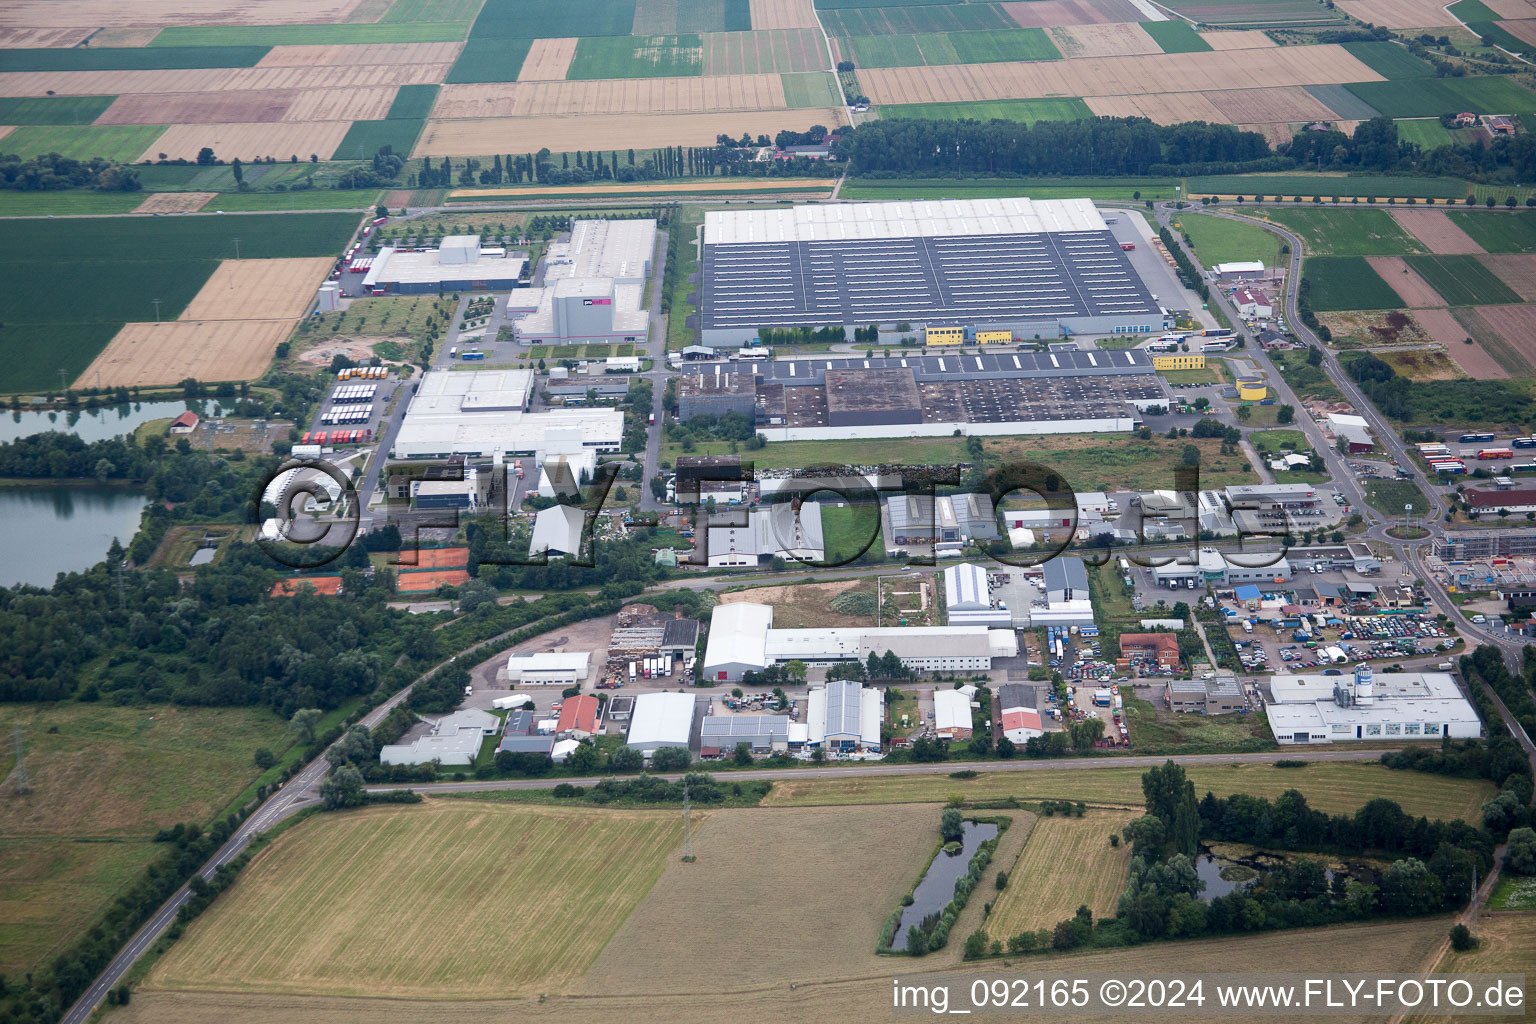 East industrial area in Offenbach an der Queich in the state Rhineland-Palatinate, Germany